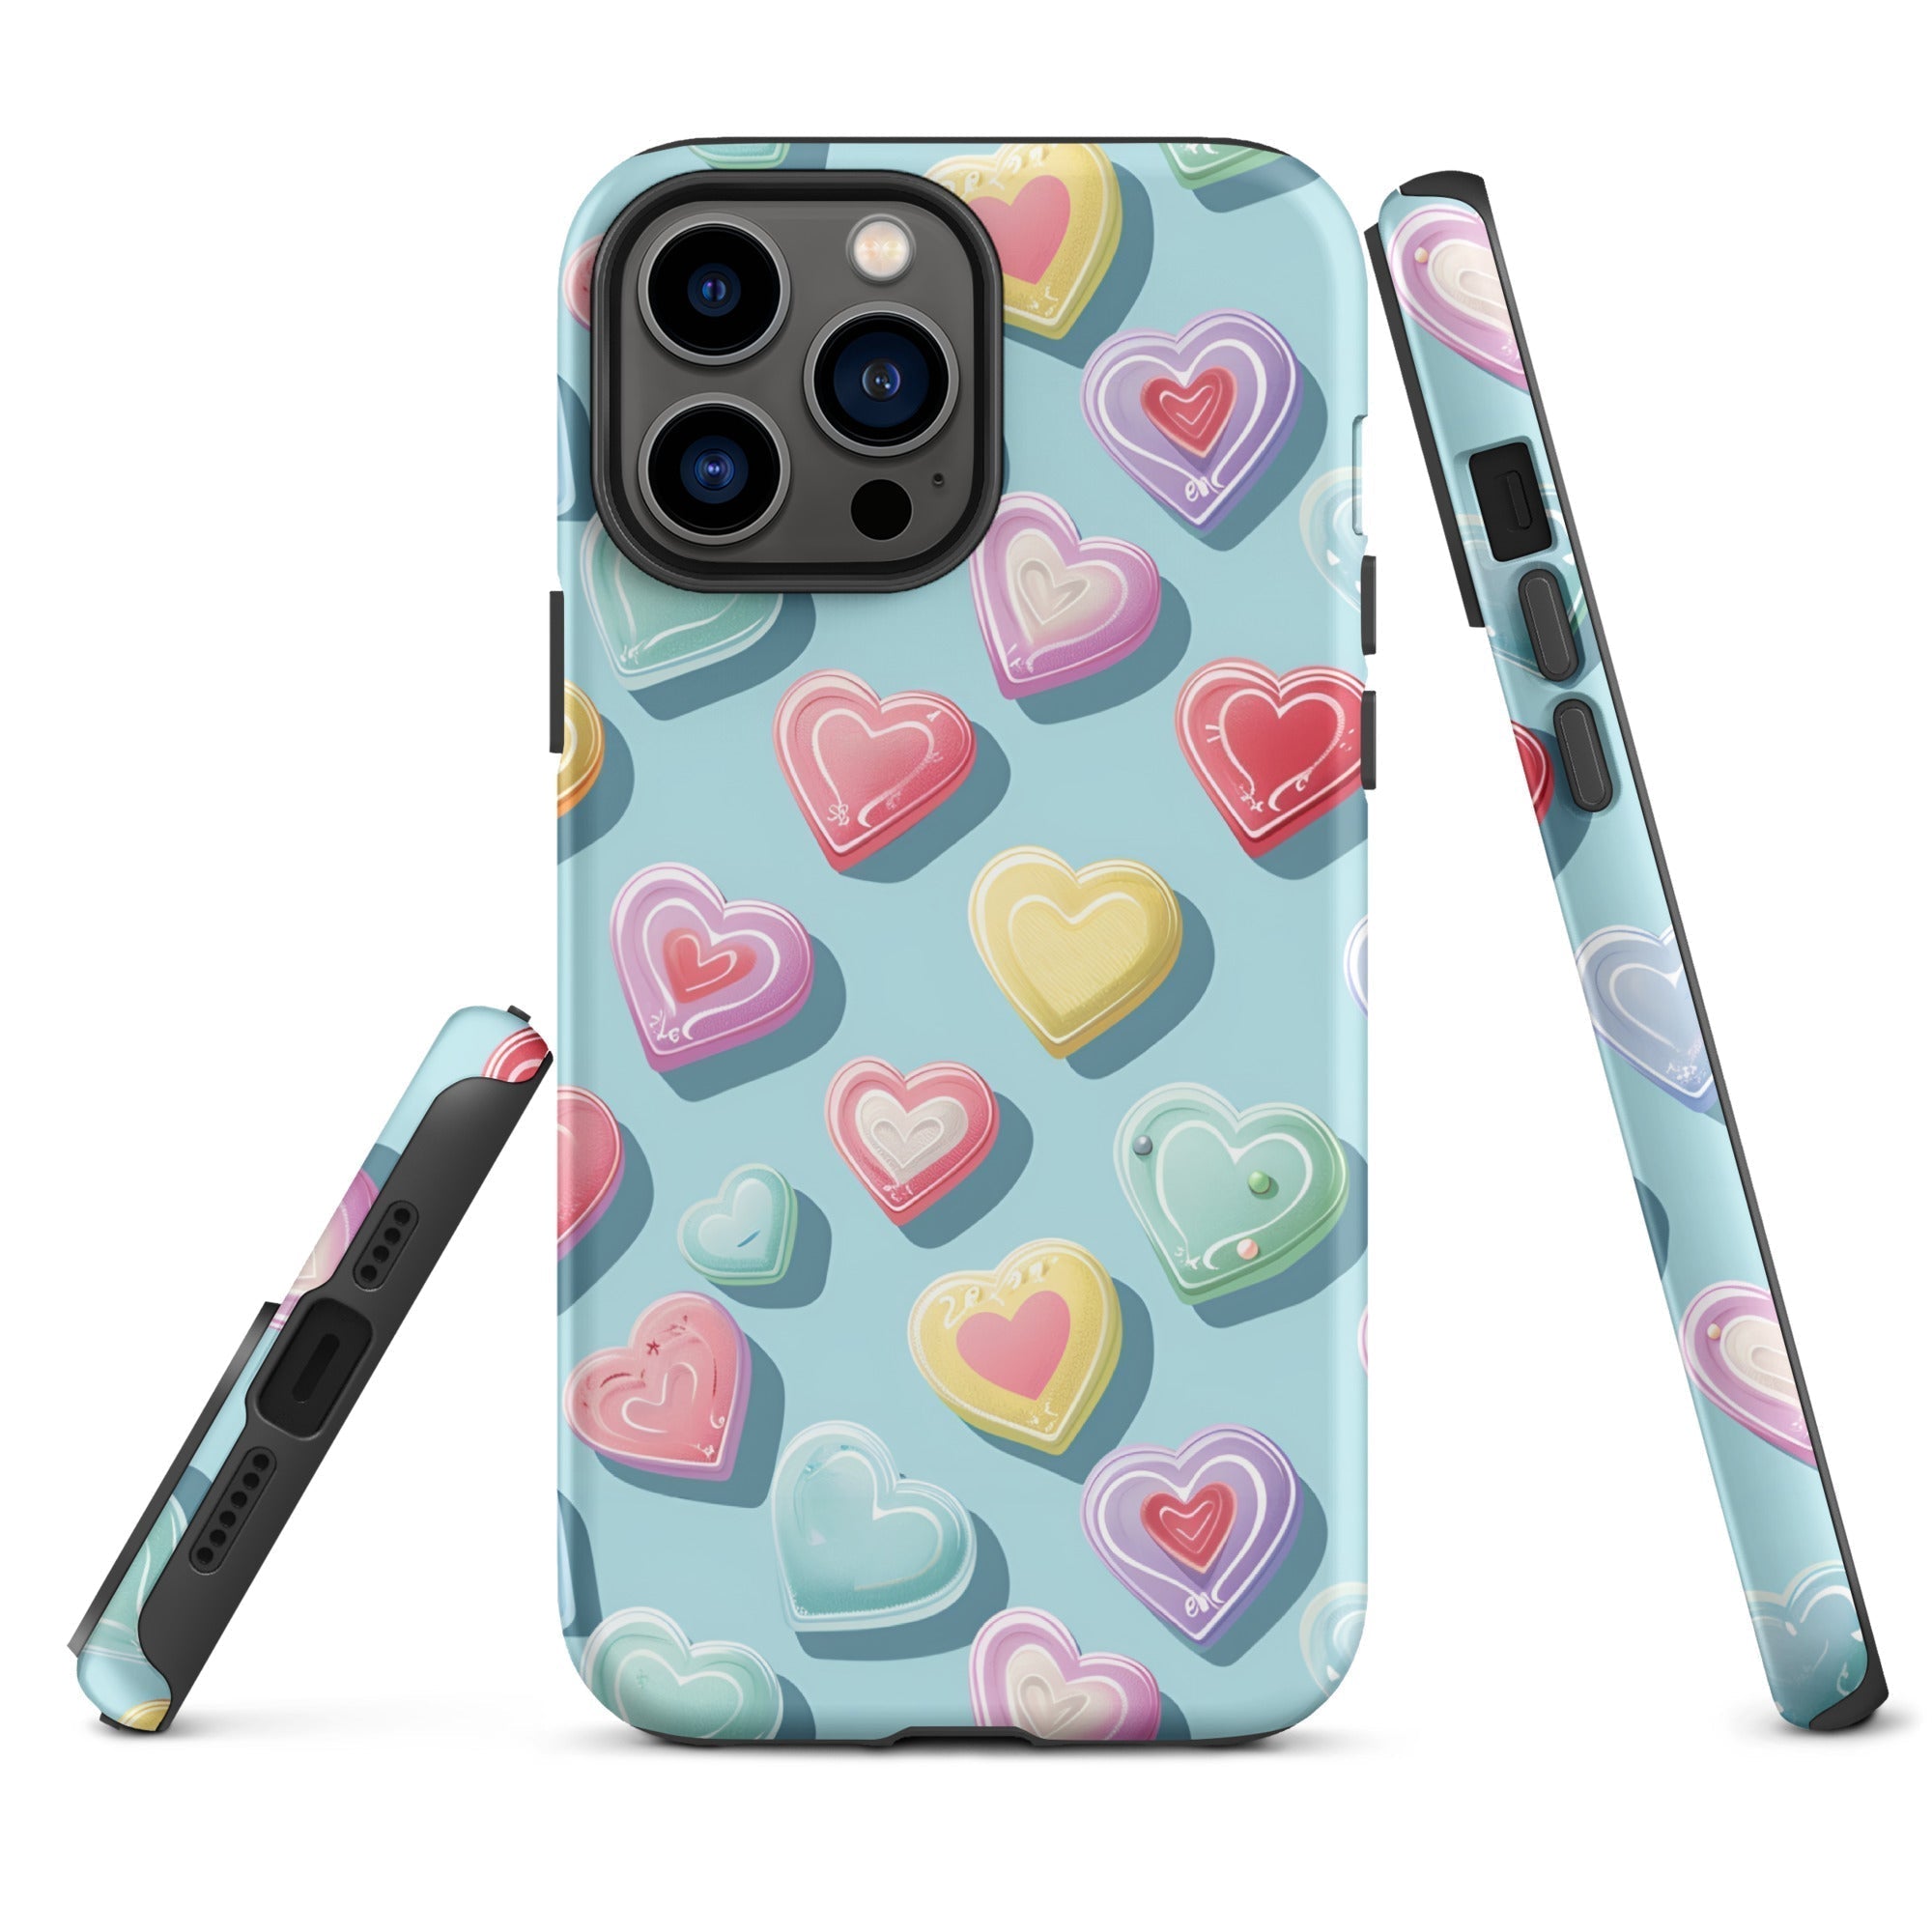 Candy Hearts: Cupid's Canvas - iPhone Case - Pattern Symphony